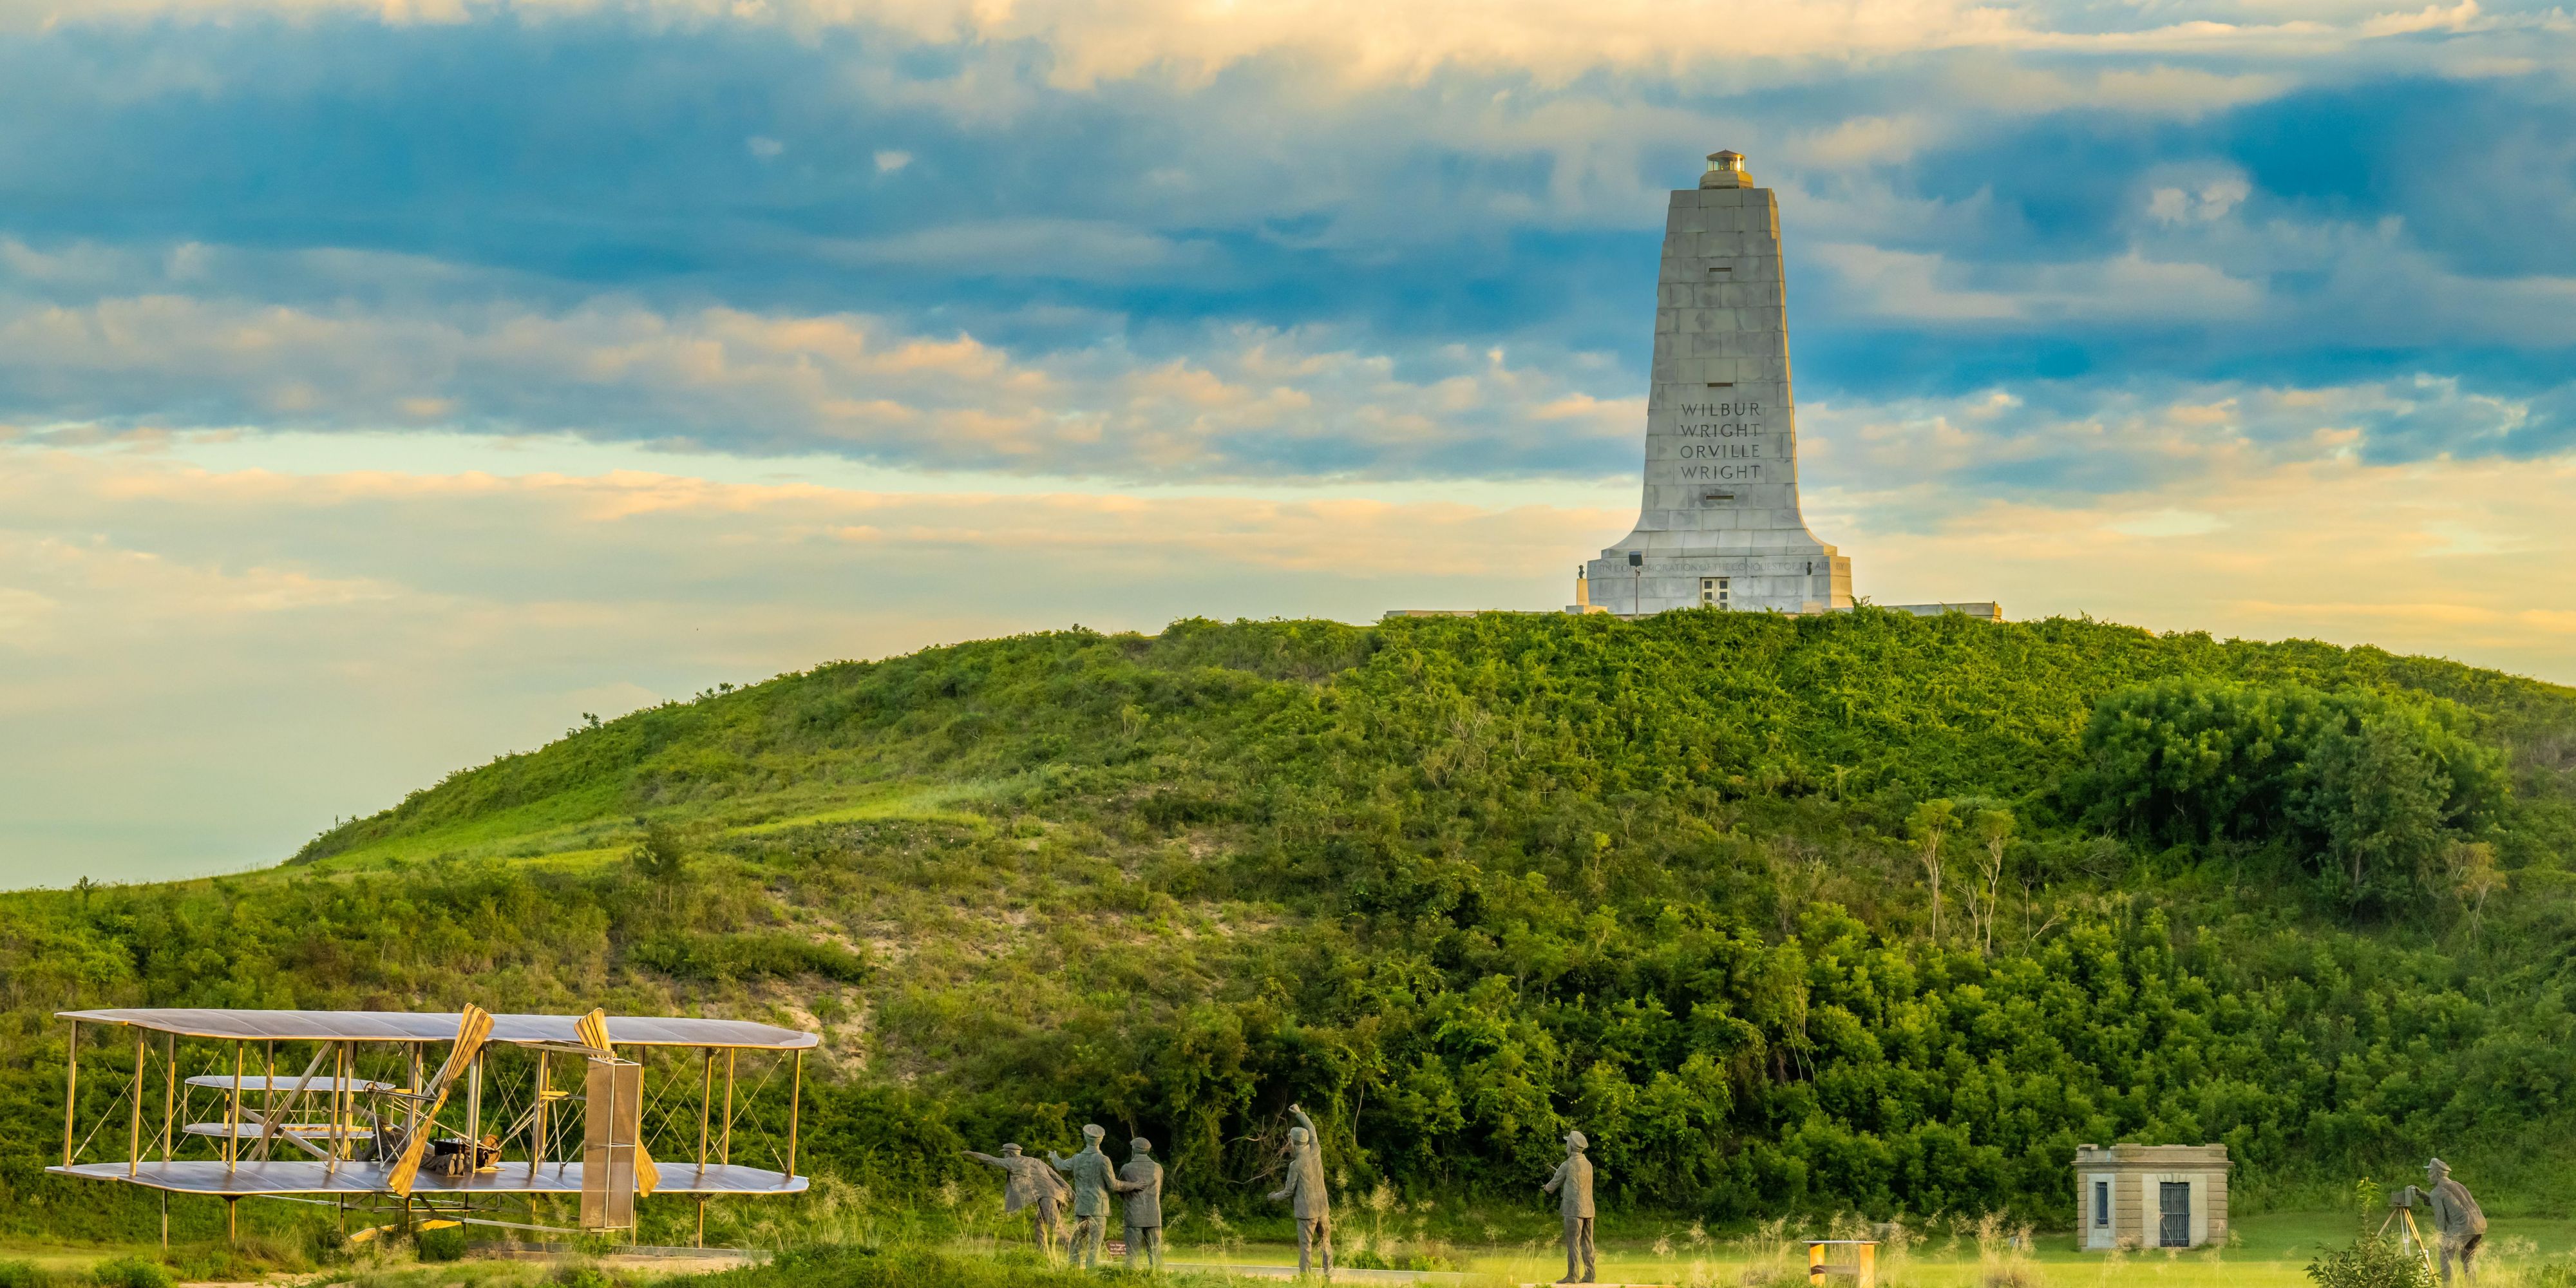 Make the most of your time during your stay. Visit Wright Brothers Memorial located six miles away from our hotel.